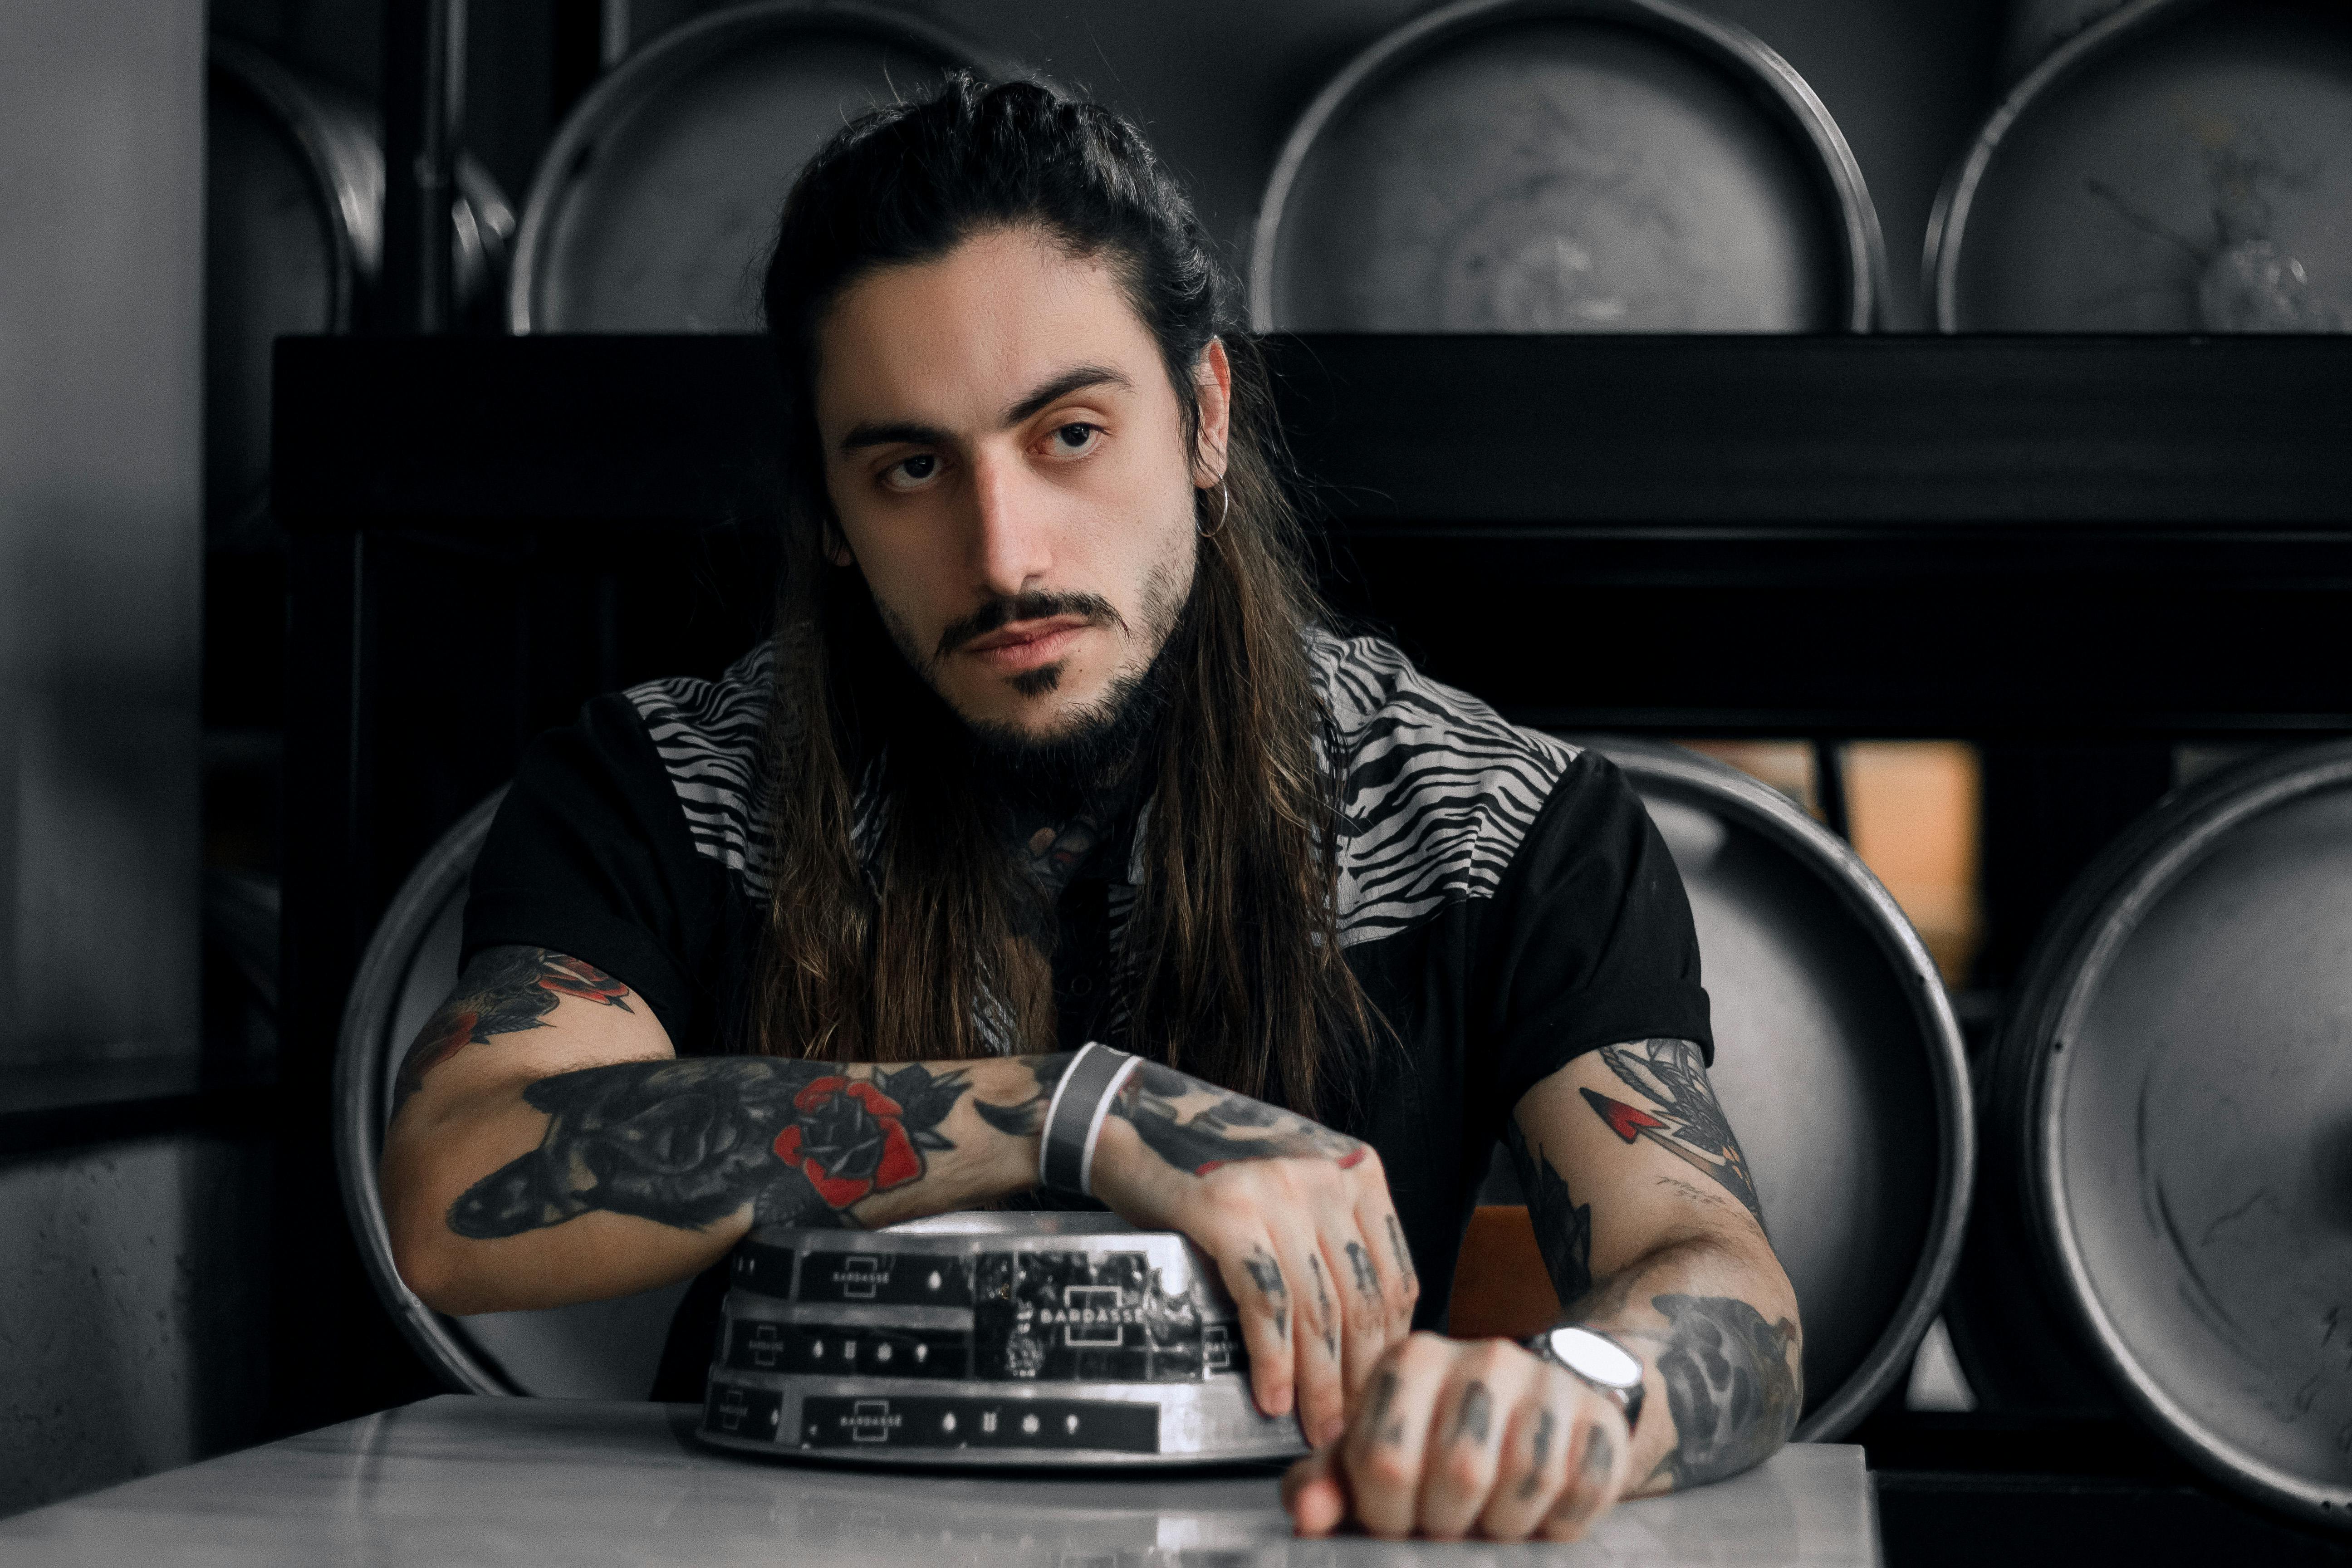 Man With Long Hair And Tattoos Sitting On A Chair Behind A Table · Free Stock Photo